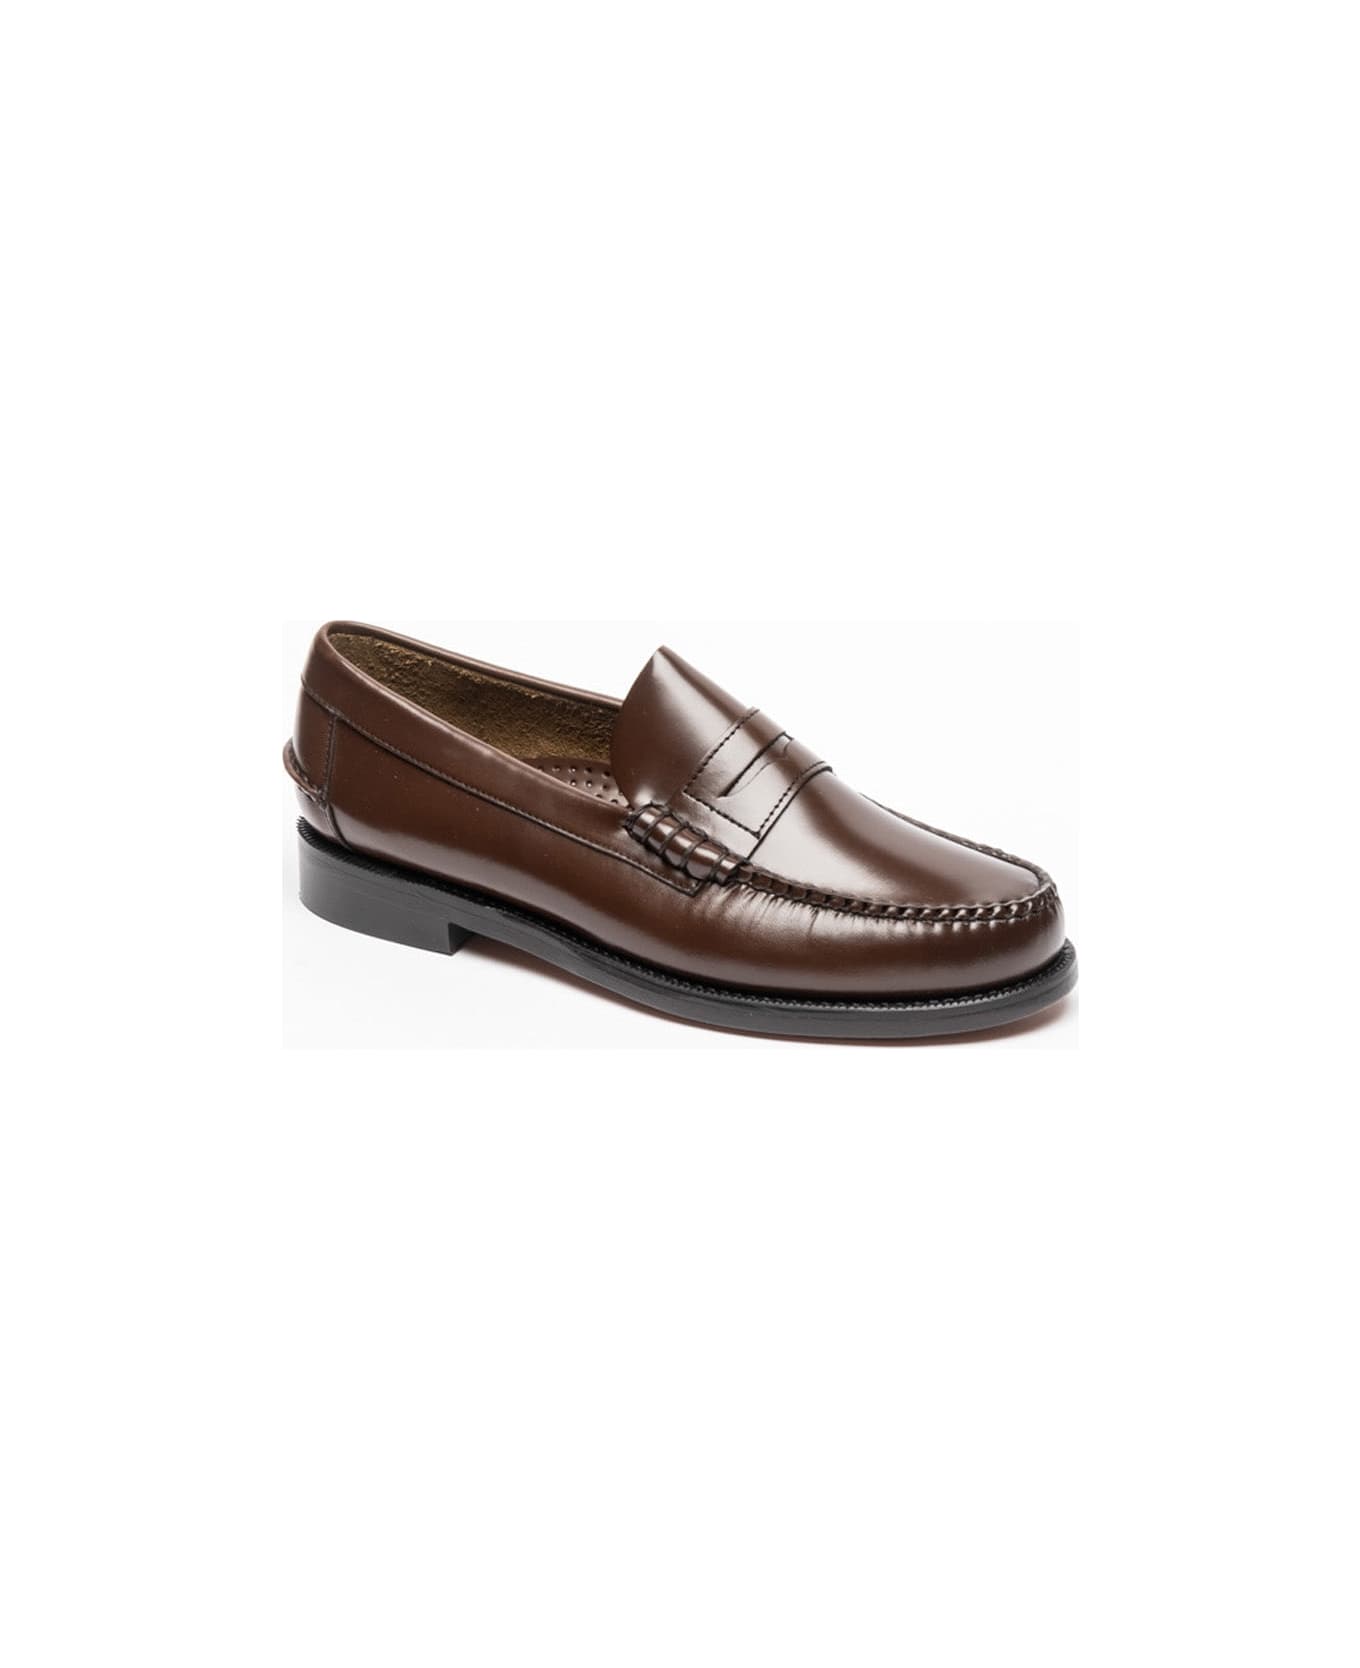 Sebago Dark Brown Brushed Leather Penny Loafer - Marrone ローファー＆デッキシューズ